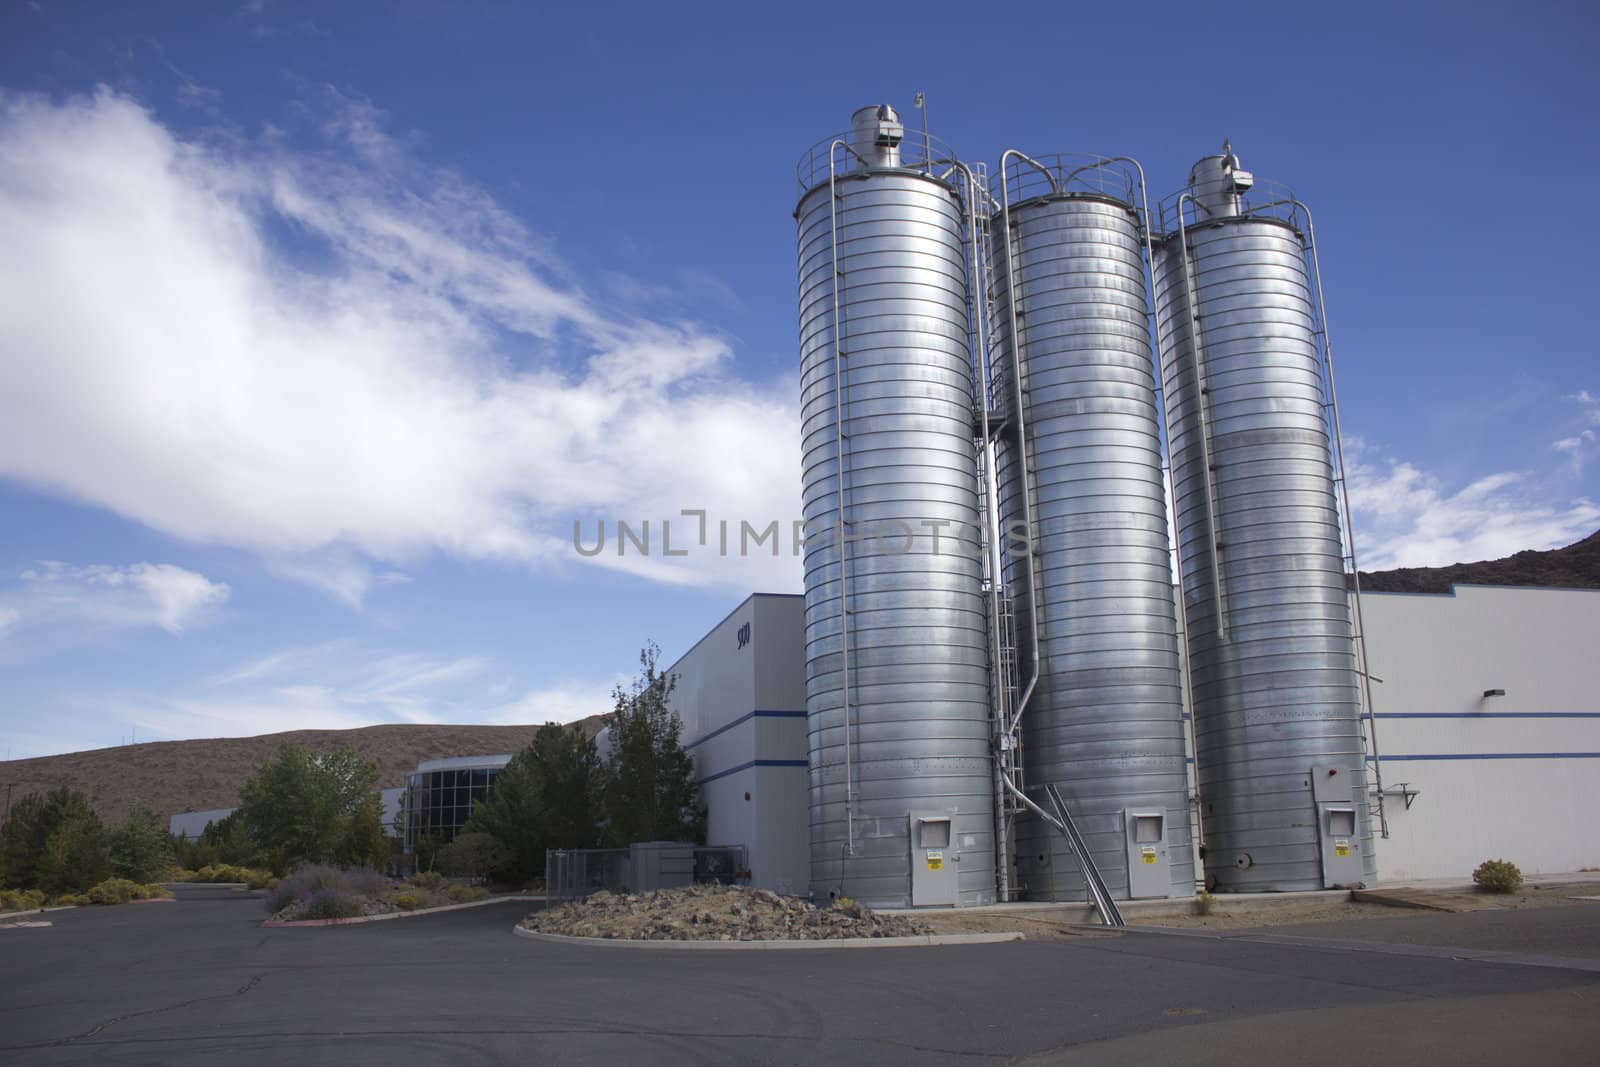 Business office or factory with silos on the side by jeremywhat